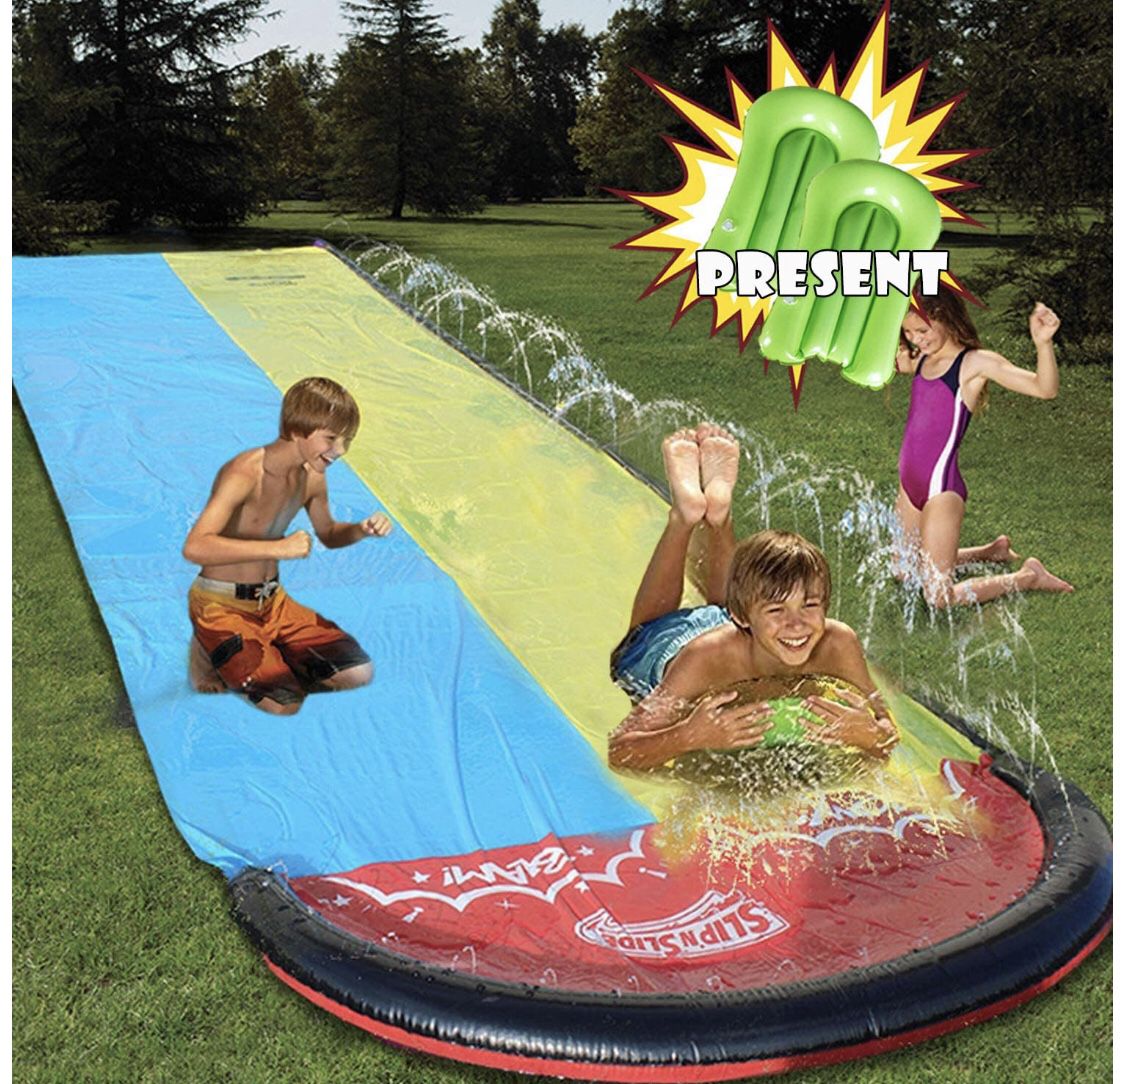 Water Slip and Slides for Kid Adults,Colorful Slip Slide Play with Plash Sprinkler,Garden Backyard Giant Racing Lanes and Splash Pool,Outdoor Water T